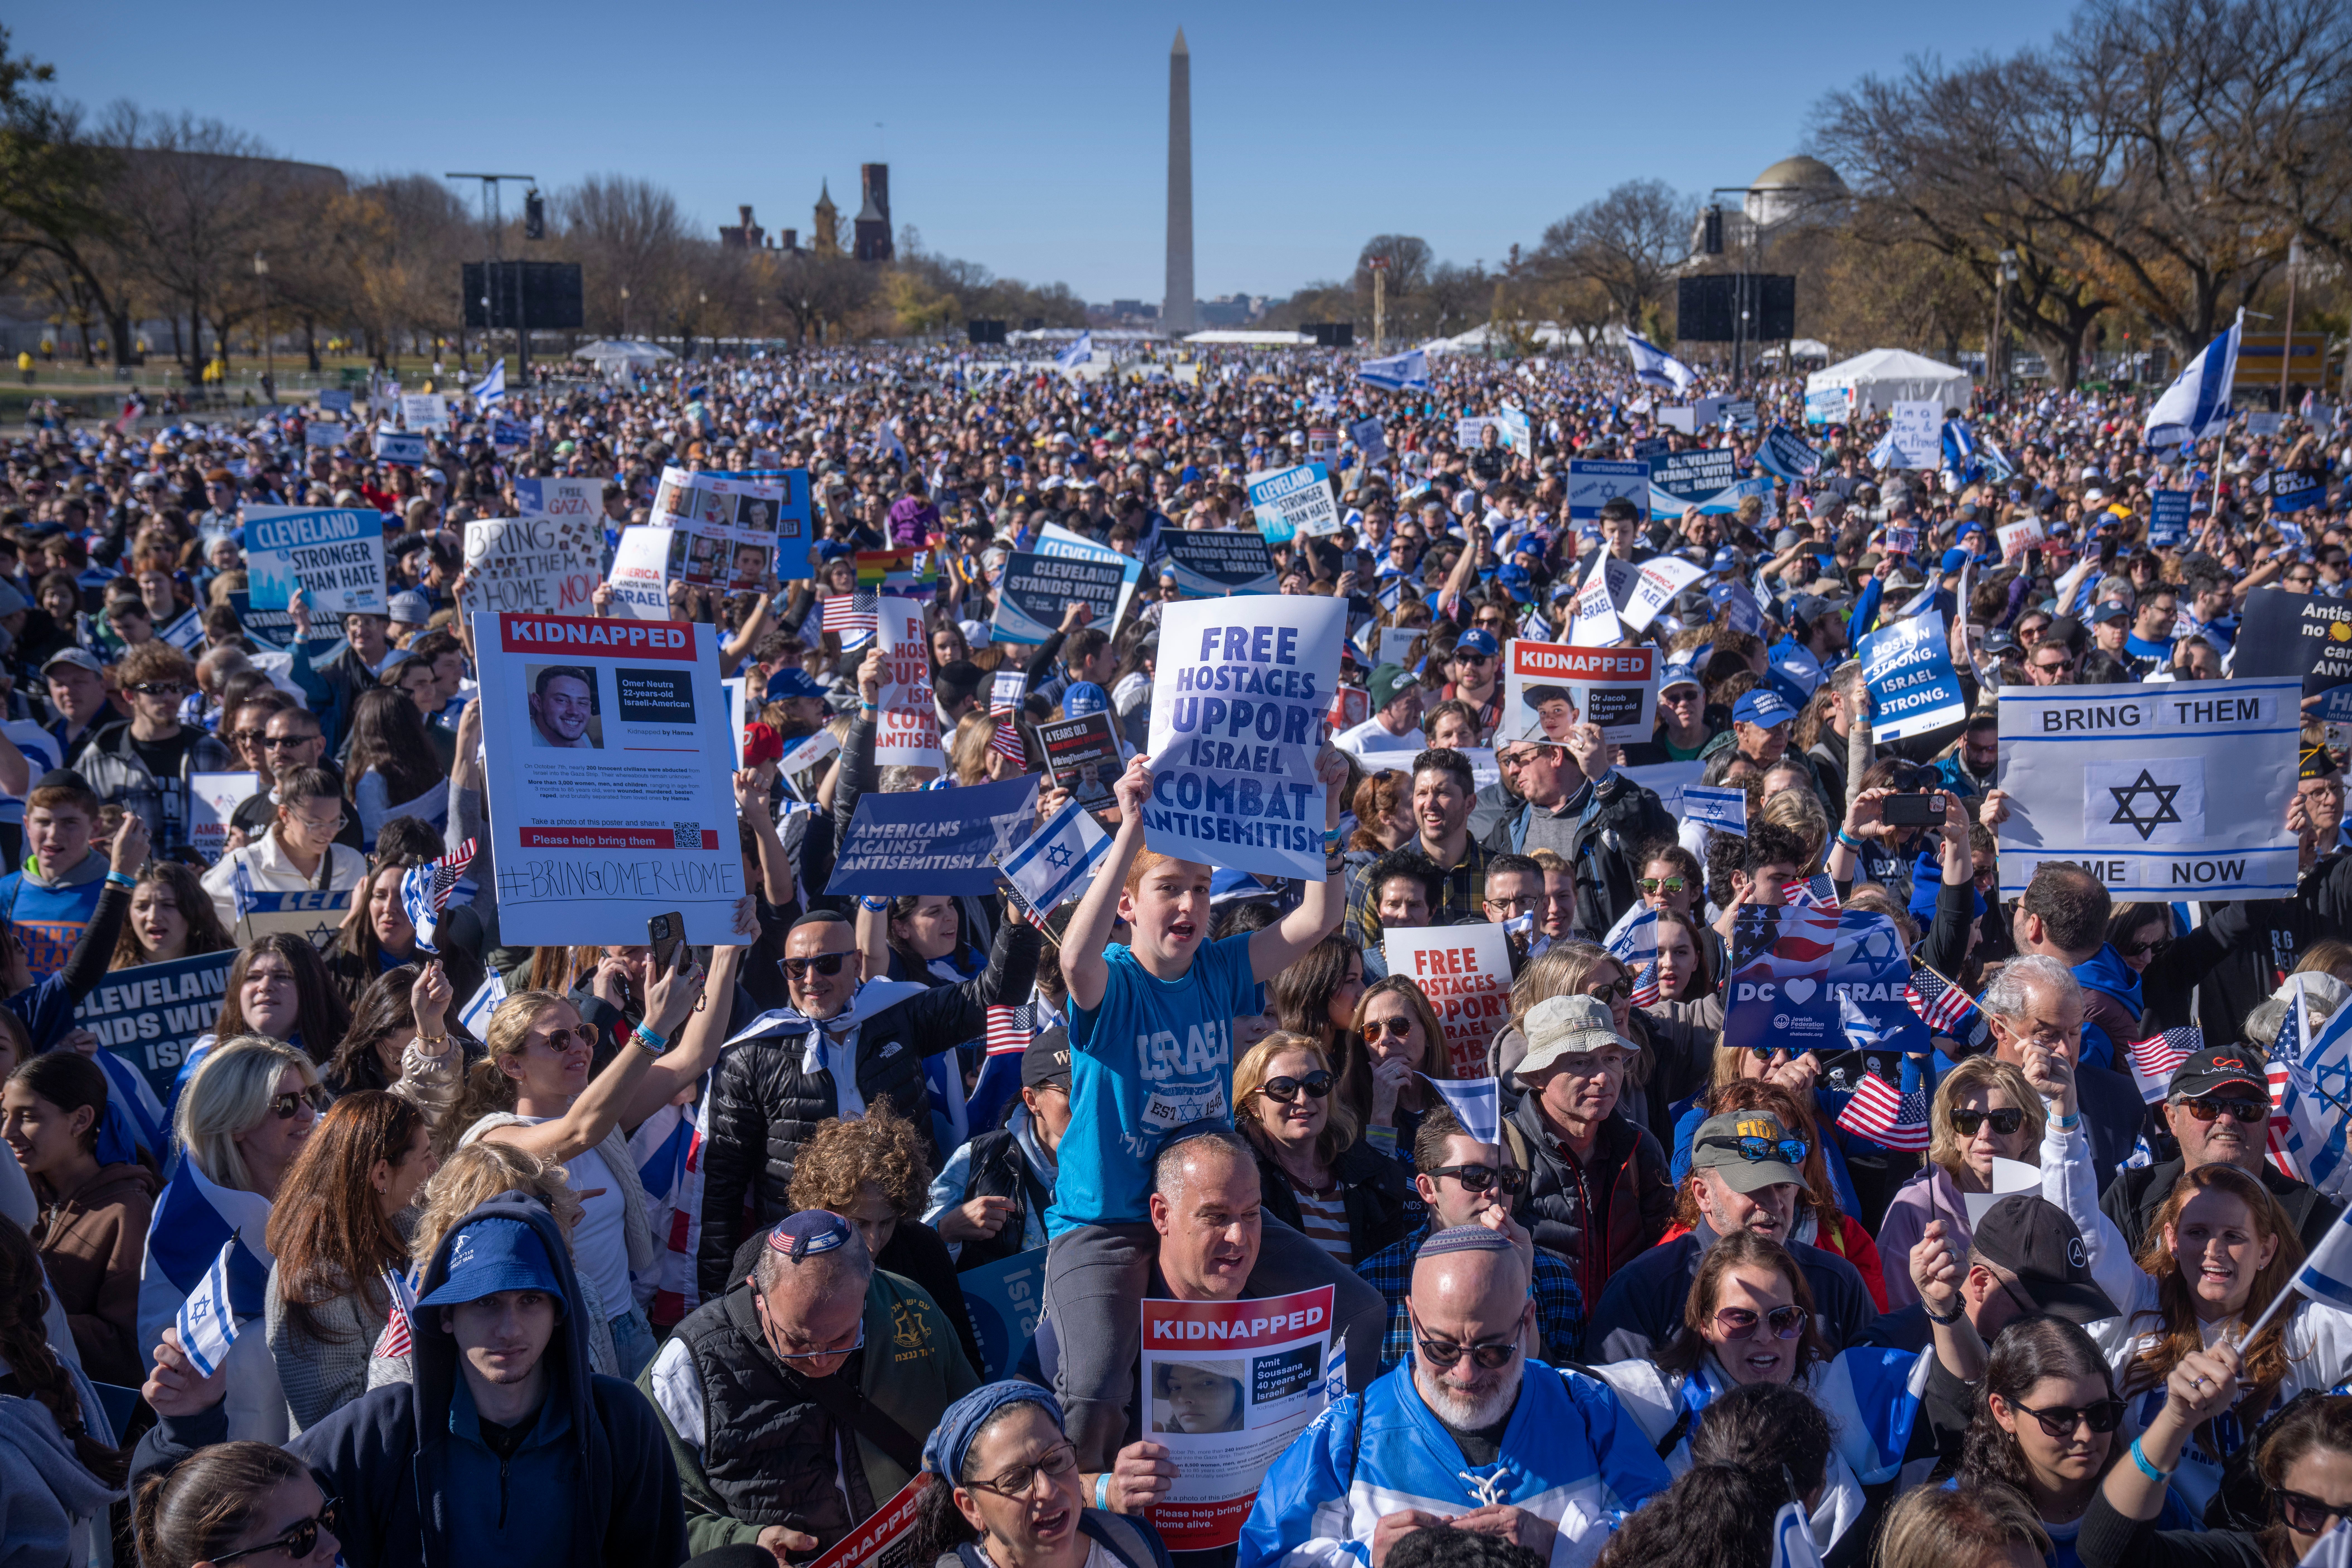 Tens of thousands took part in the March for Israel in Washington DC on Tuesday